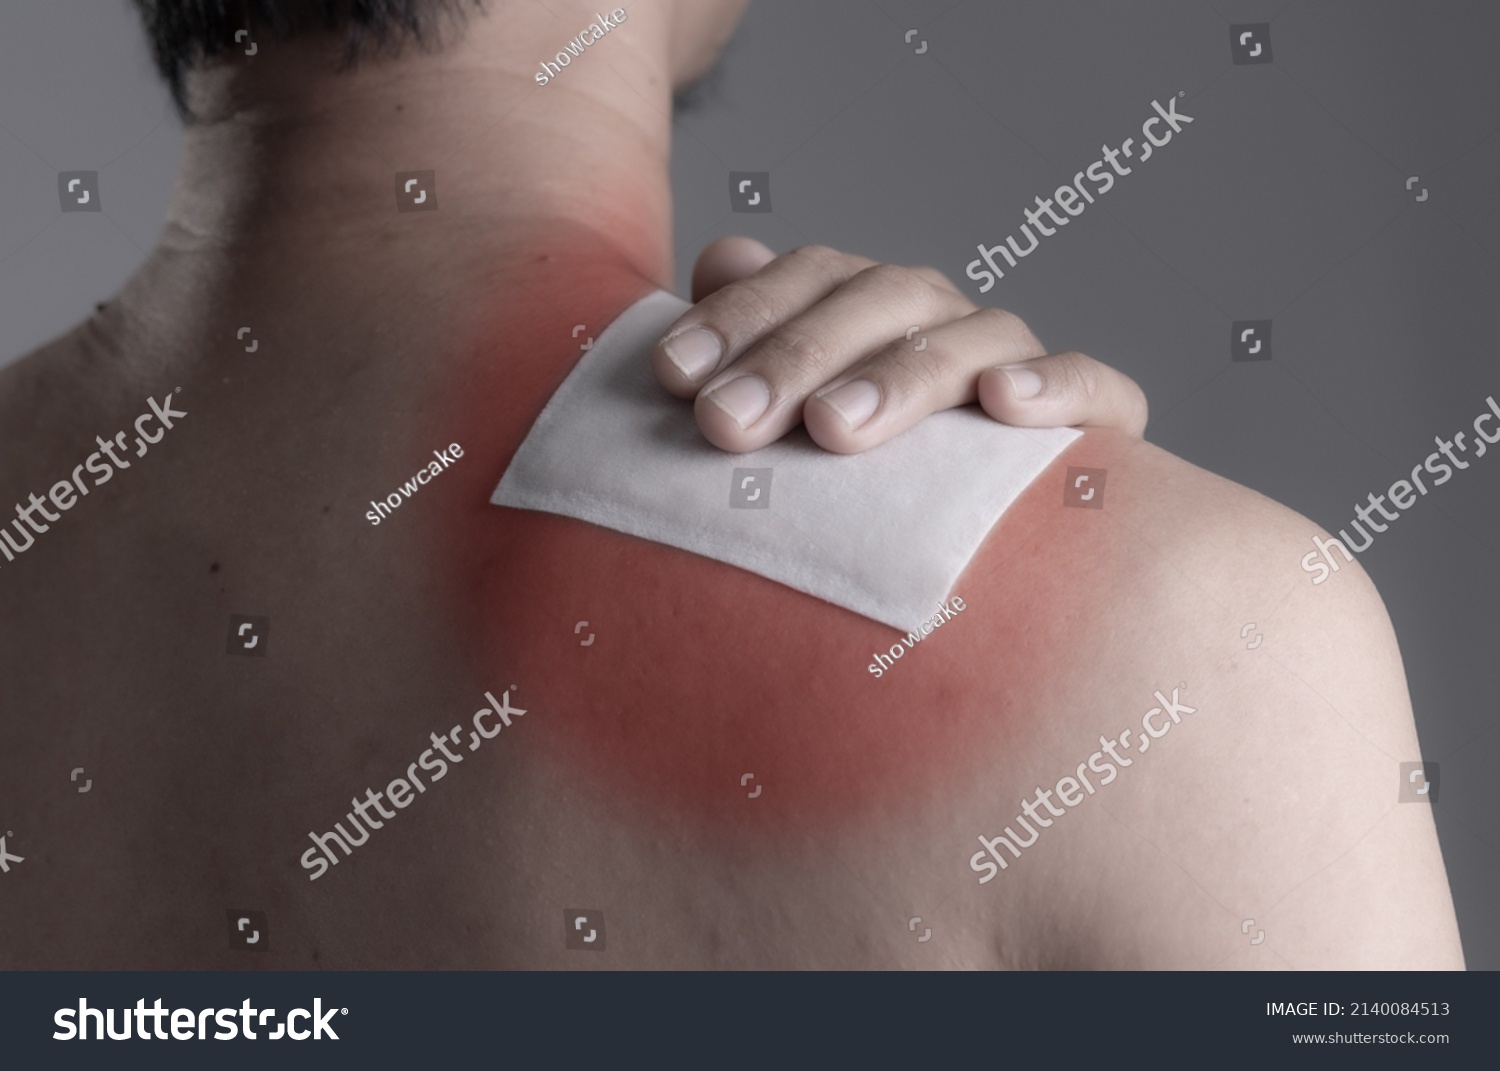 Medicated pain relief patch with man pain shoulders,office syndrome,Health problems from overworked concept. #2140084513